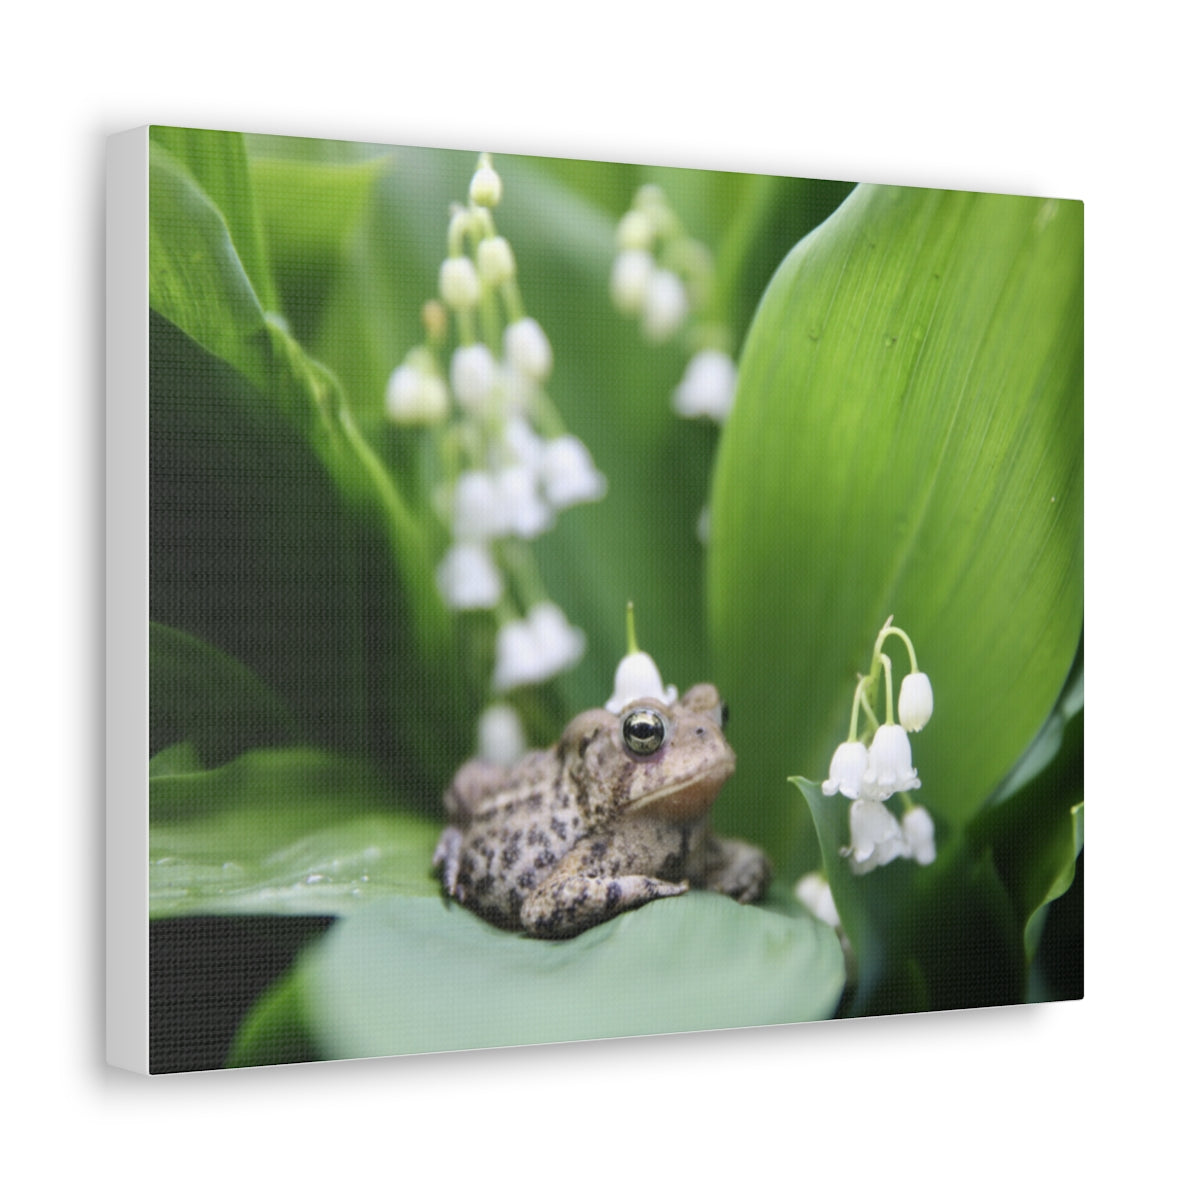 Toad and Lily - Canvas